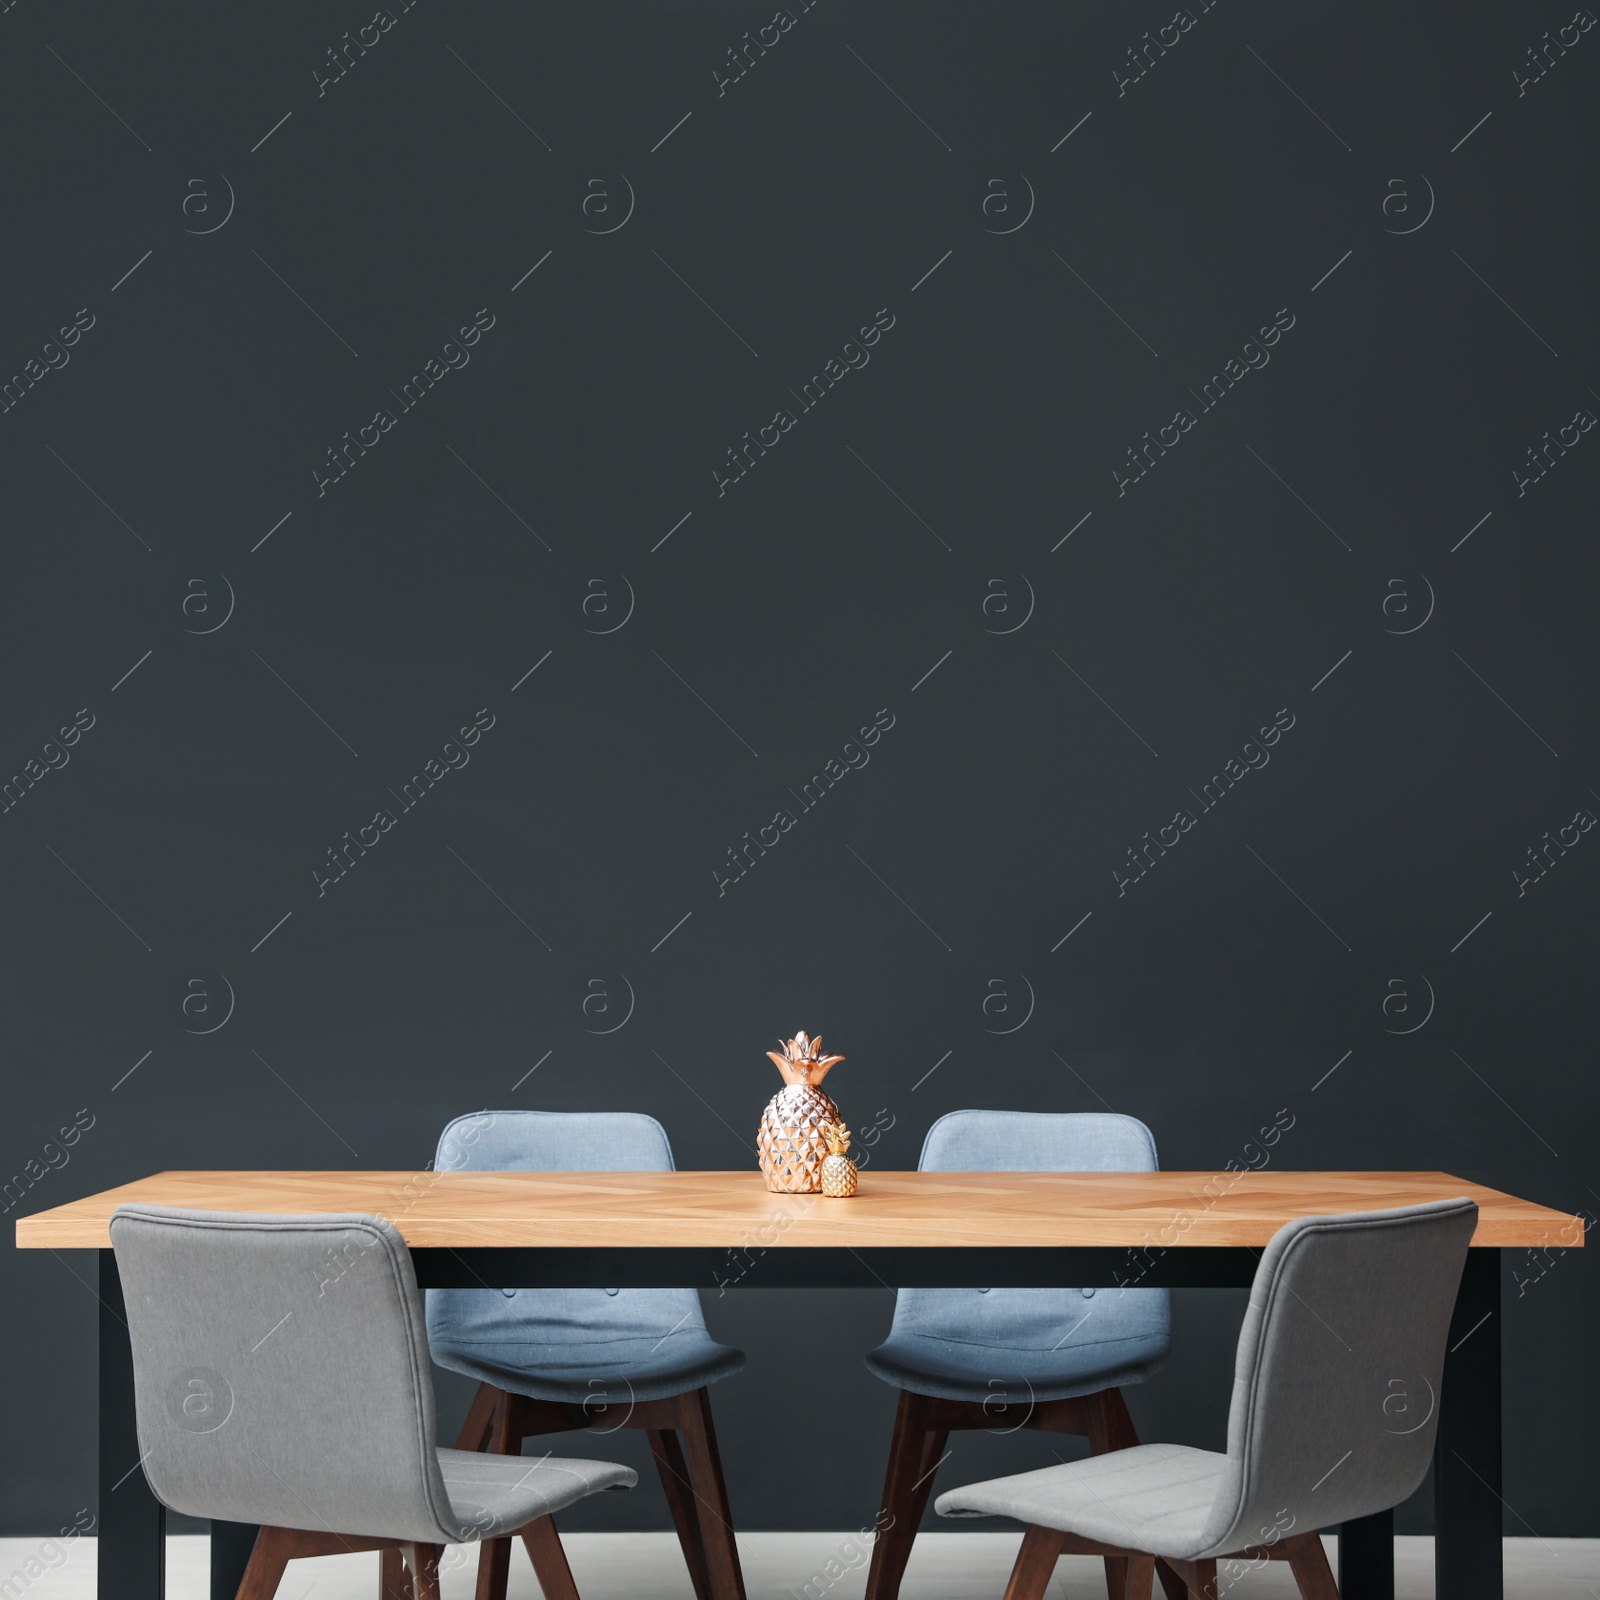 Photo of Modern table with decorative pineapples near black wall